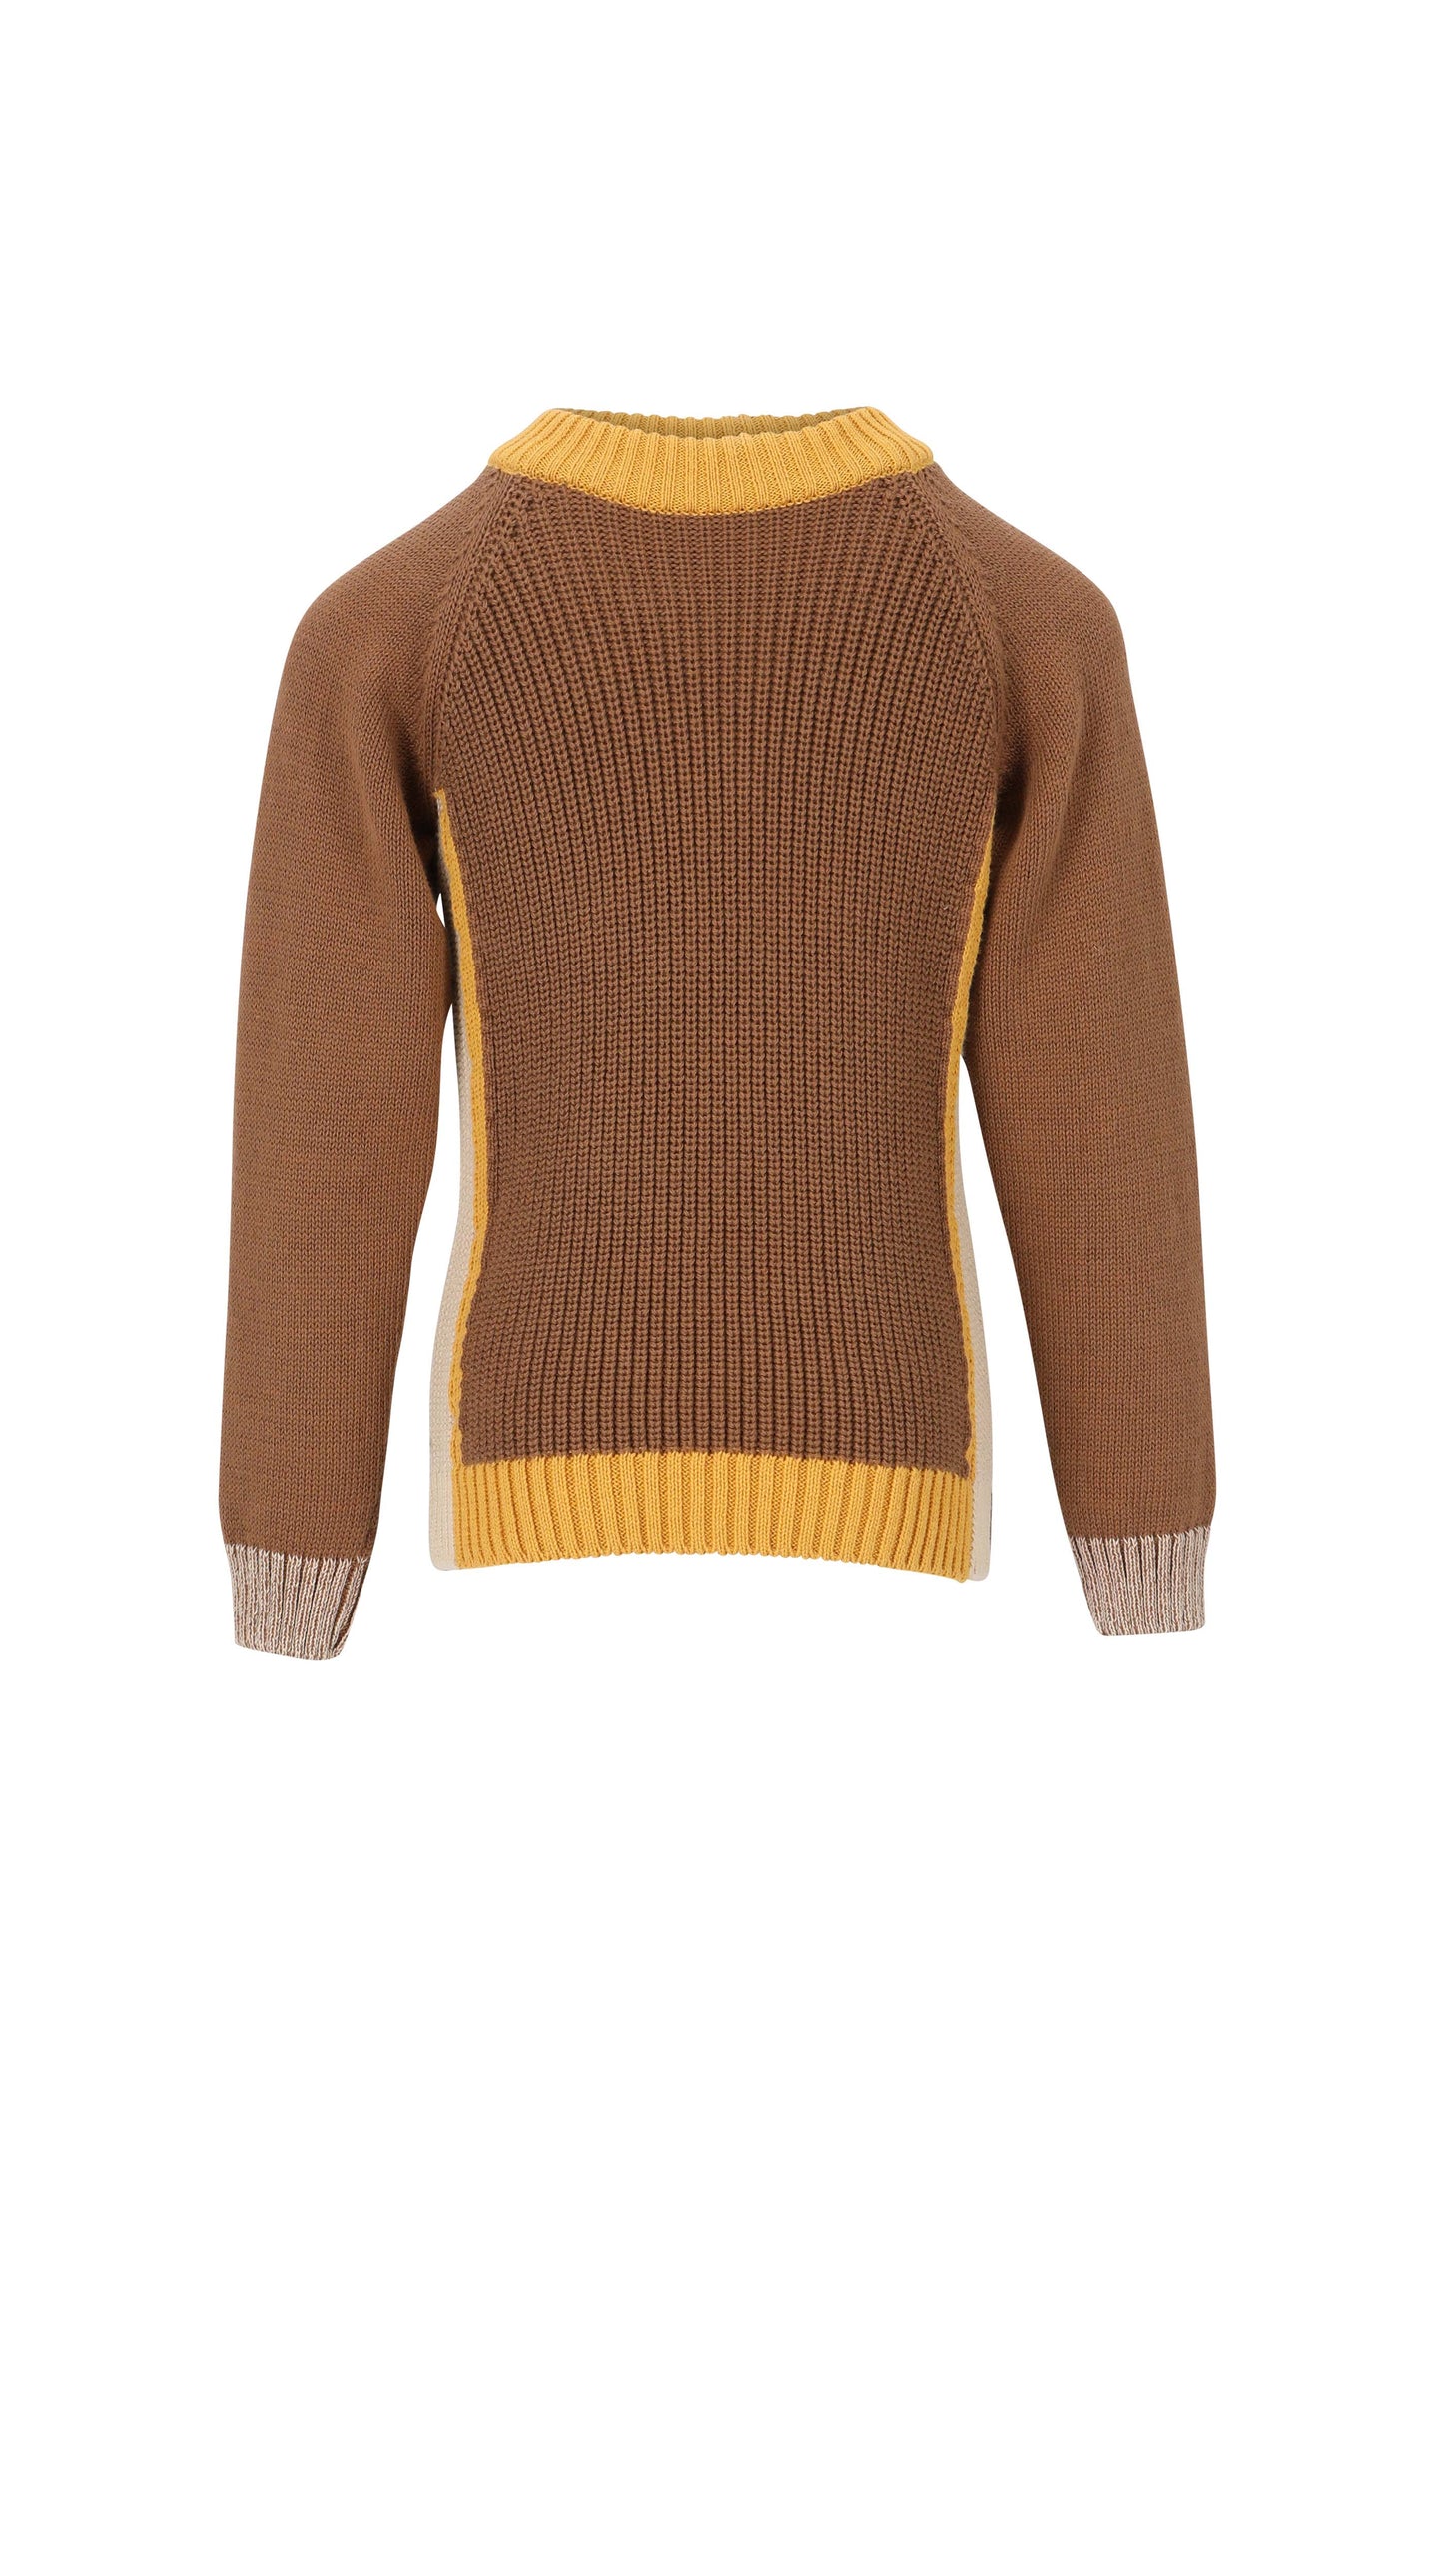 lmn3 kids brown and yellow jumper 14 